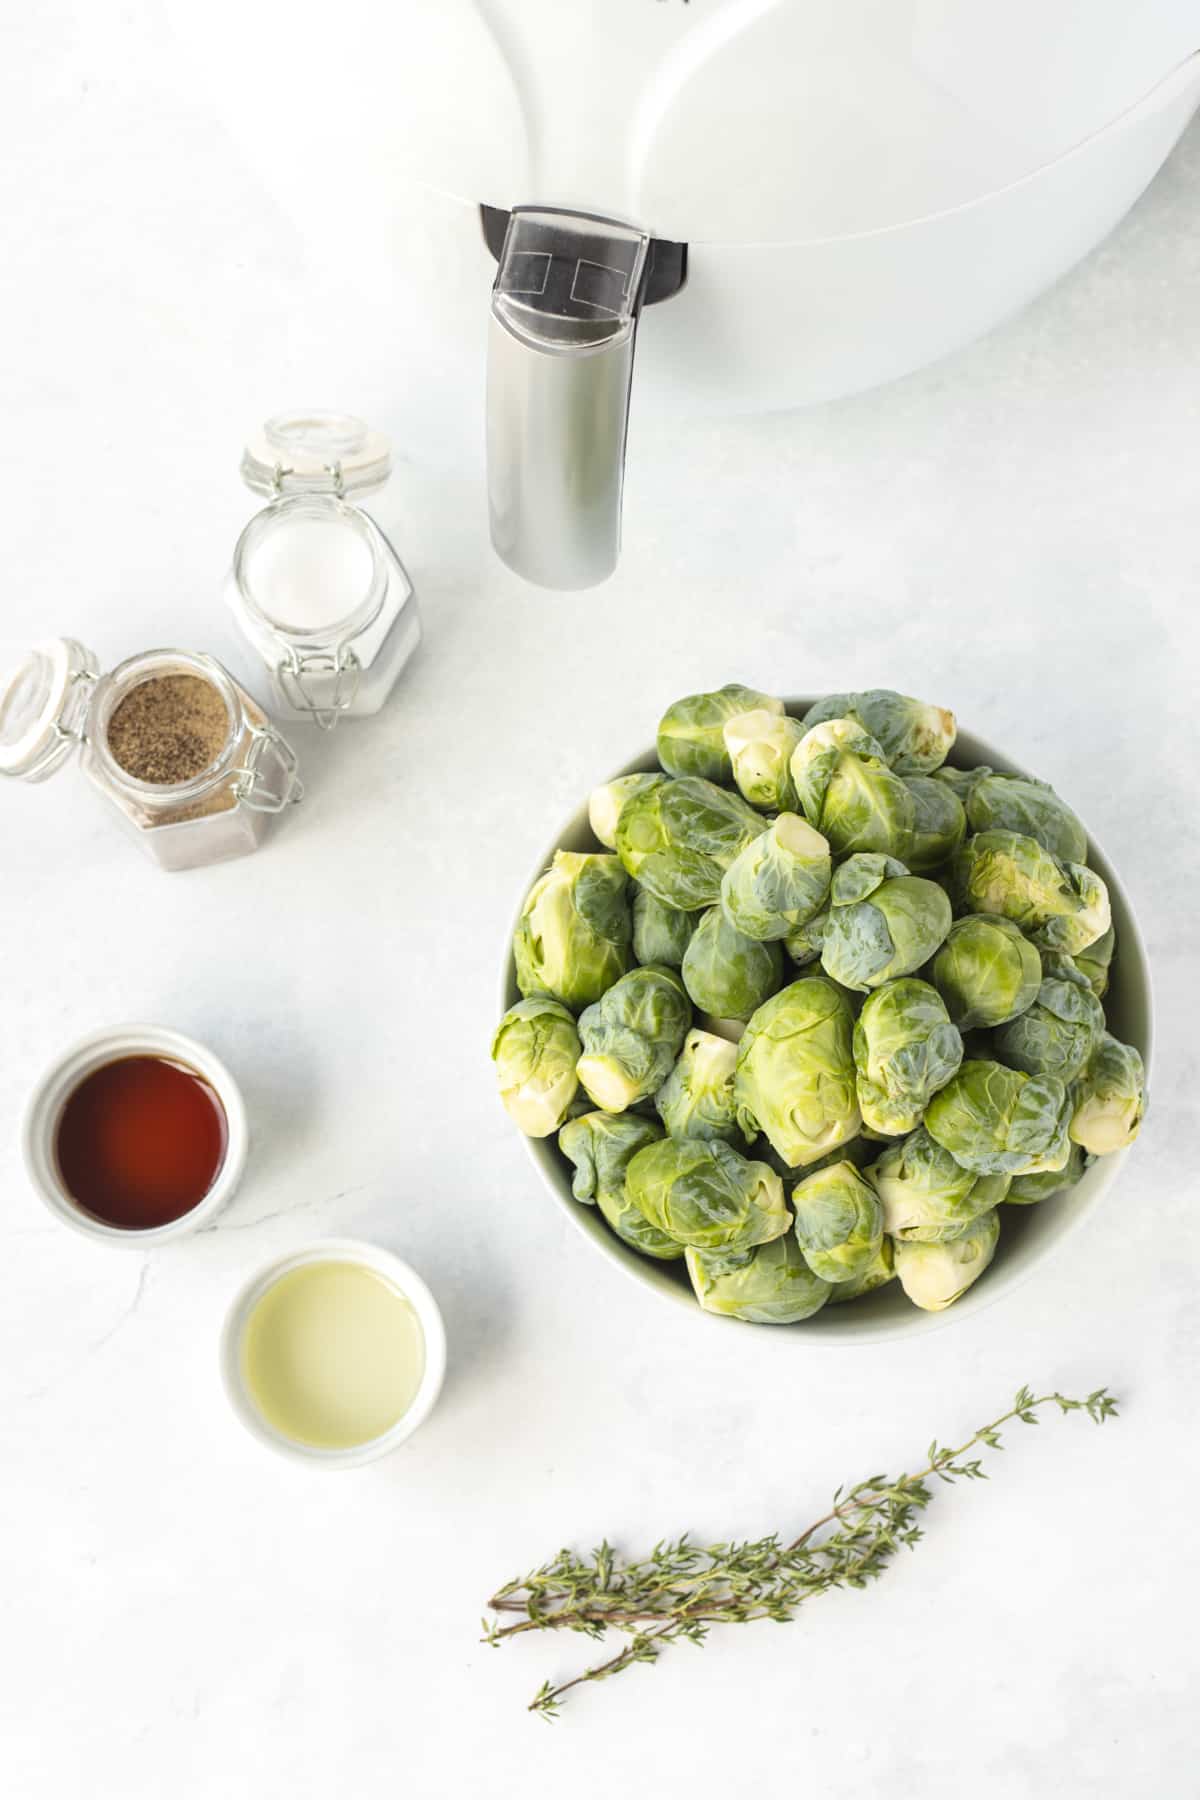 ingredients to make air fryer brussels sprouts